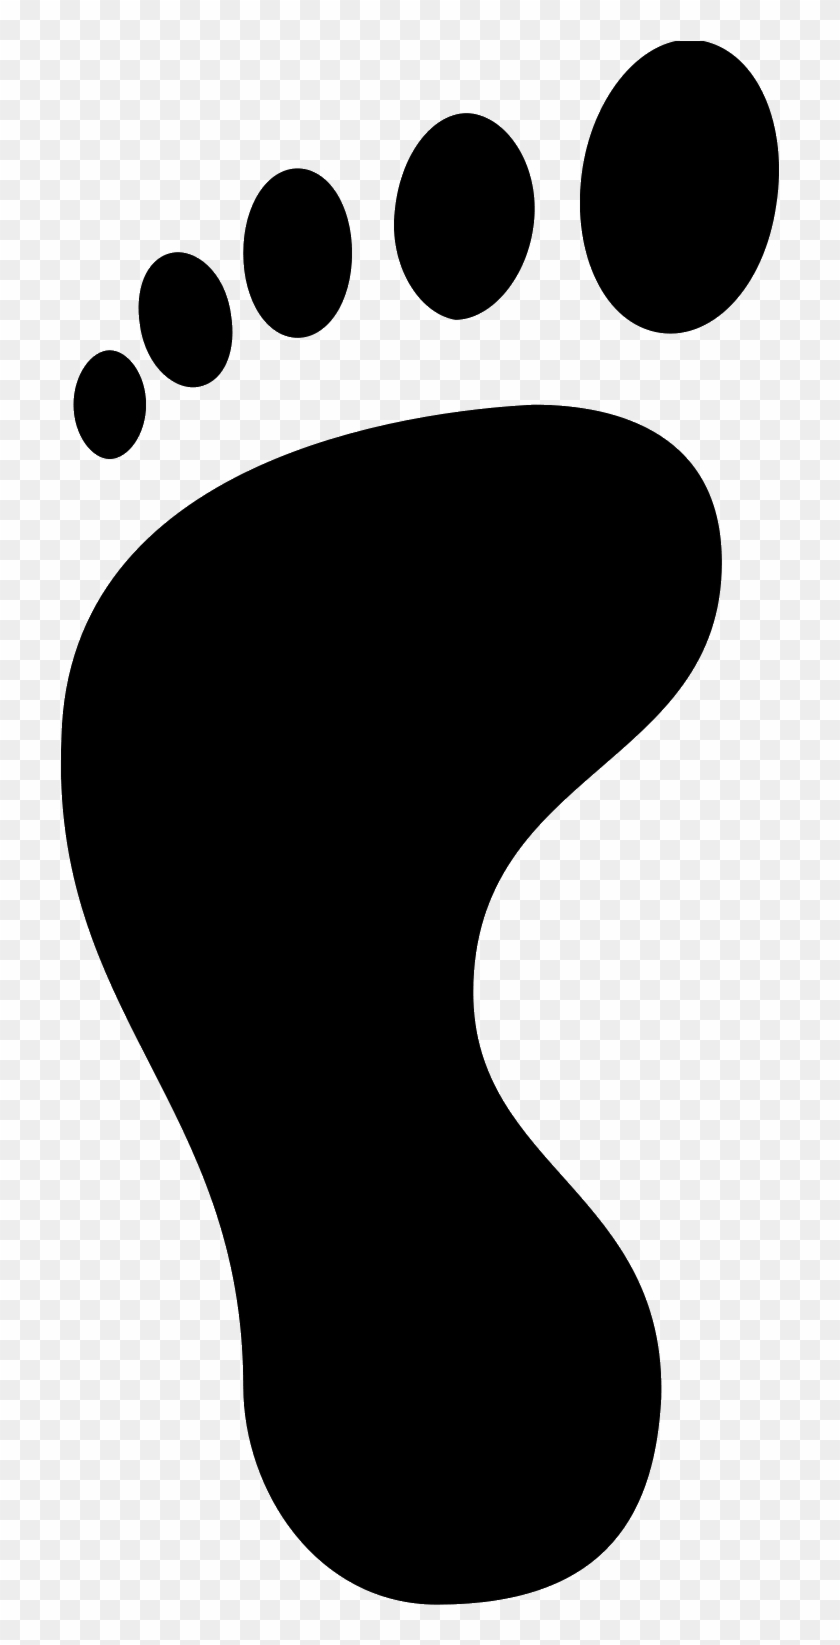 It Shows The Heel And The Ball Of The Left Foot With - Footprint Icon #1083491